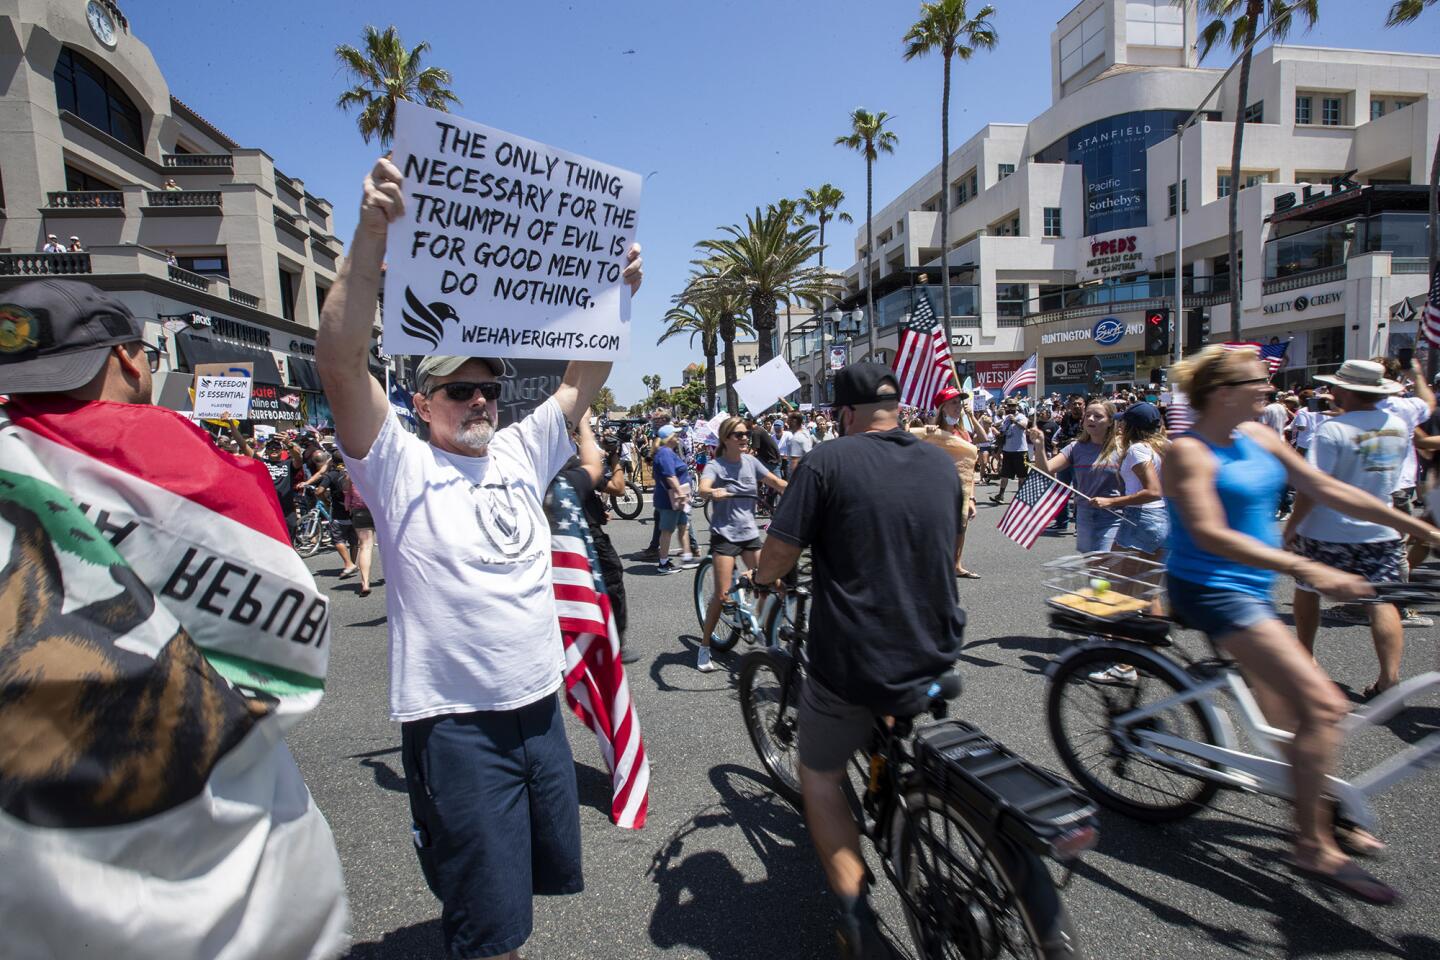 Protesters refuse to social distance while crossing the street at Main Street and Pacific Coast Highway in Huntington Beach on Friday.